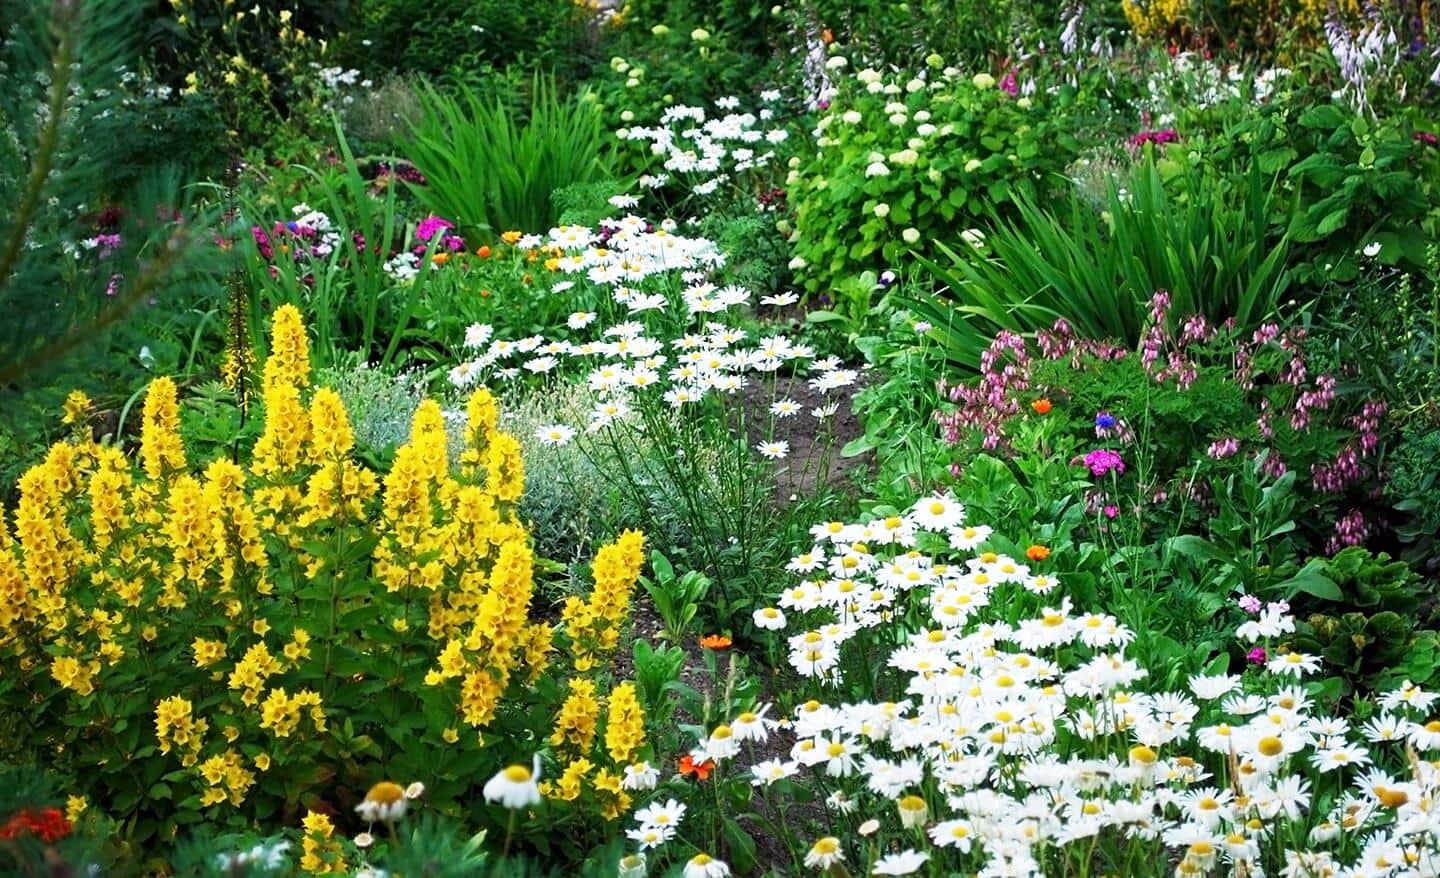 A perennial garden bed with daisies and more flowers